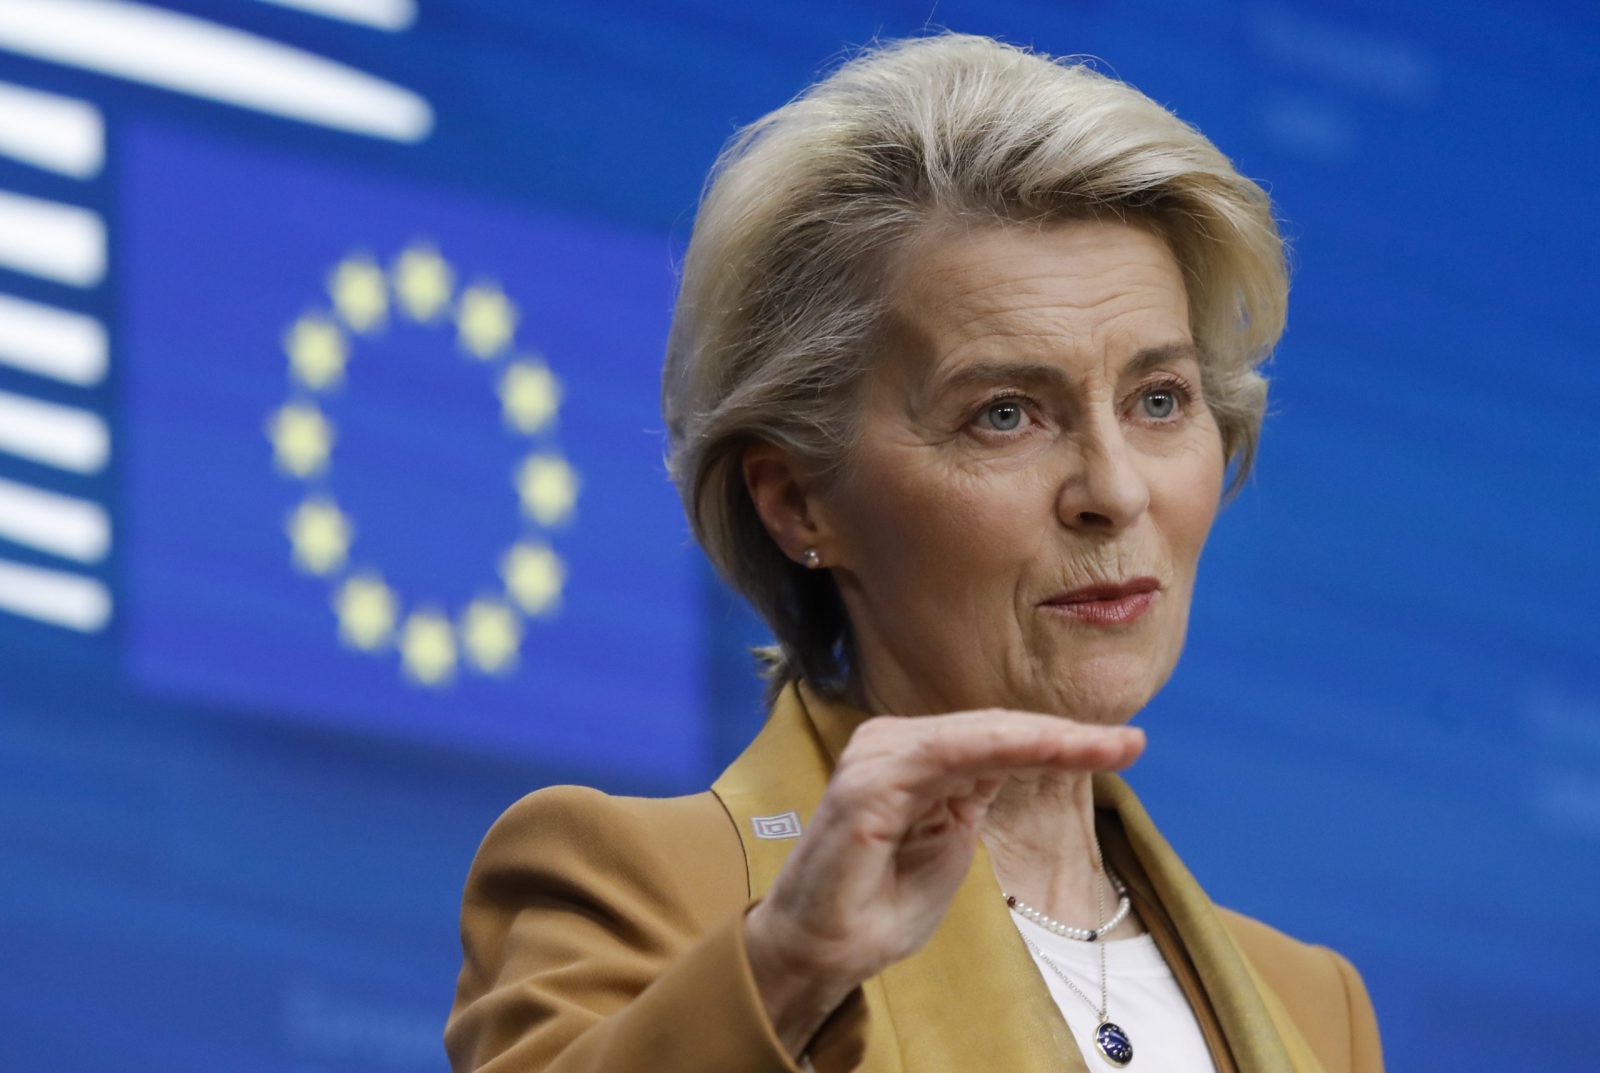 epa10539494 European Commission President Ursula von der Leyen gives a press briefing at the end of first day of  EU Summit in Brussels, Belgium, 23 March 2023. EU leaders meet for a two-day summit in Brussels to discuss the latest developments in relation to 'Russia's war of aggression against Ukraine' and continued EU support for Ukraine and its people. The leaders will also debate on competitiveness, single market and the economy, energy, external relations among other topics, including migration.  EPA/OLIVIER HOSLET